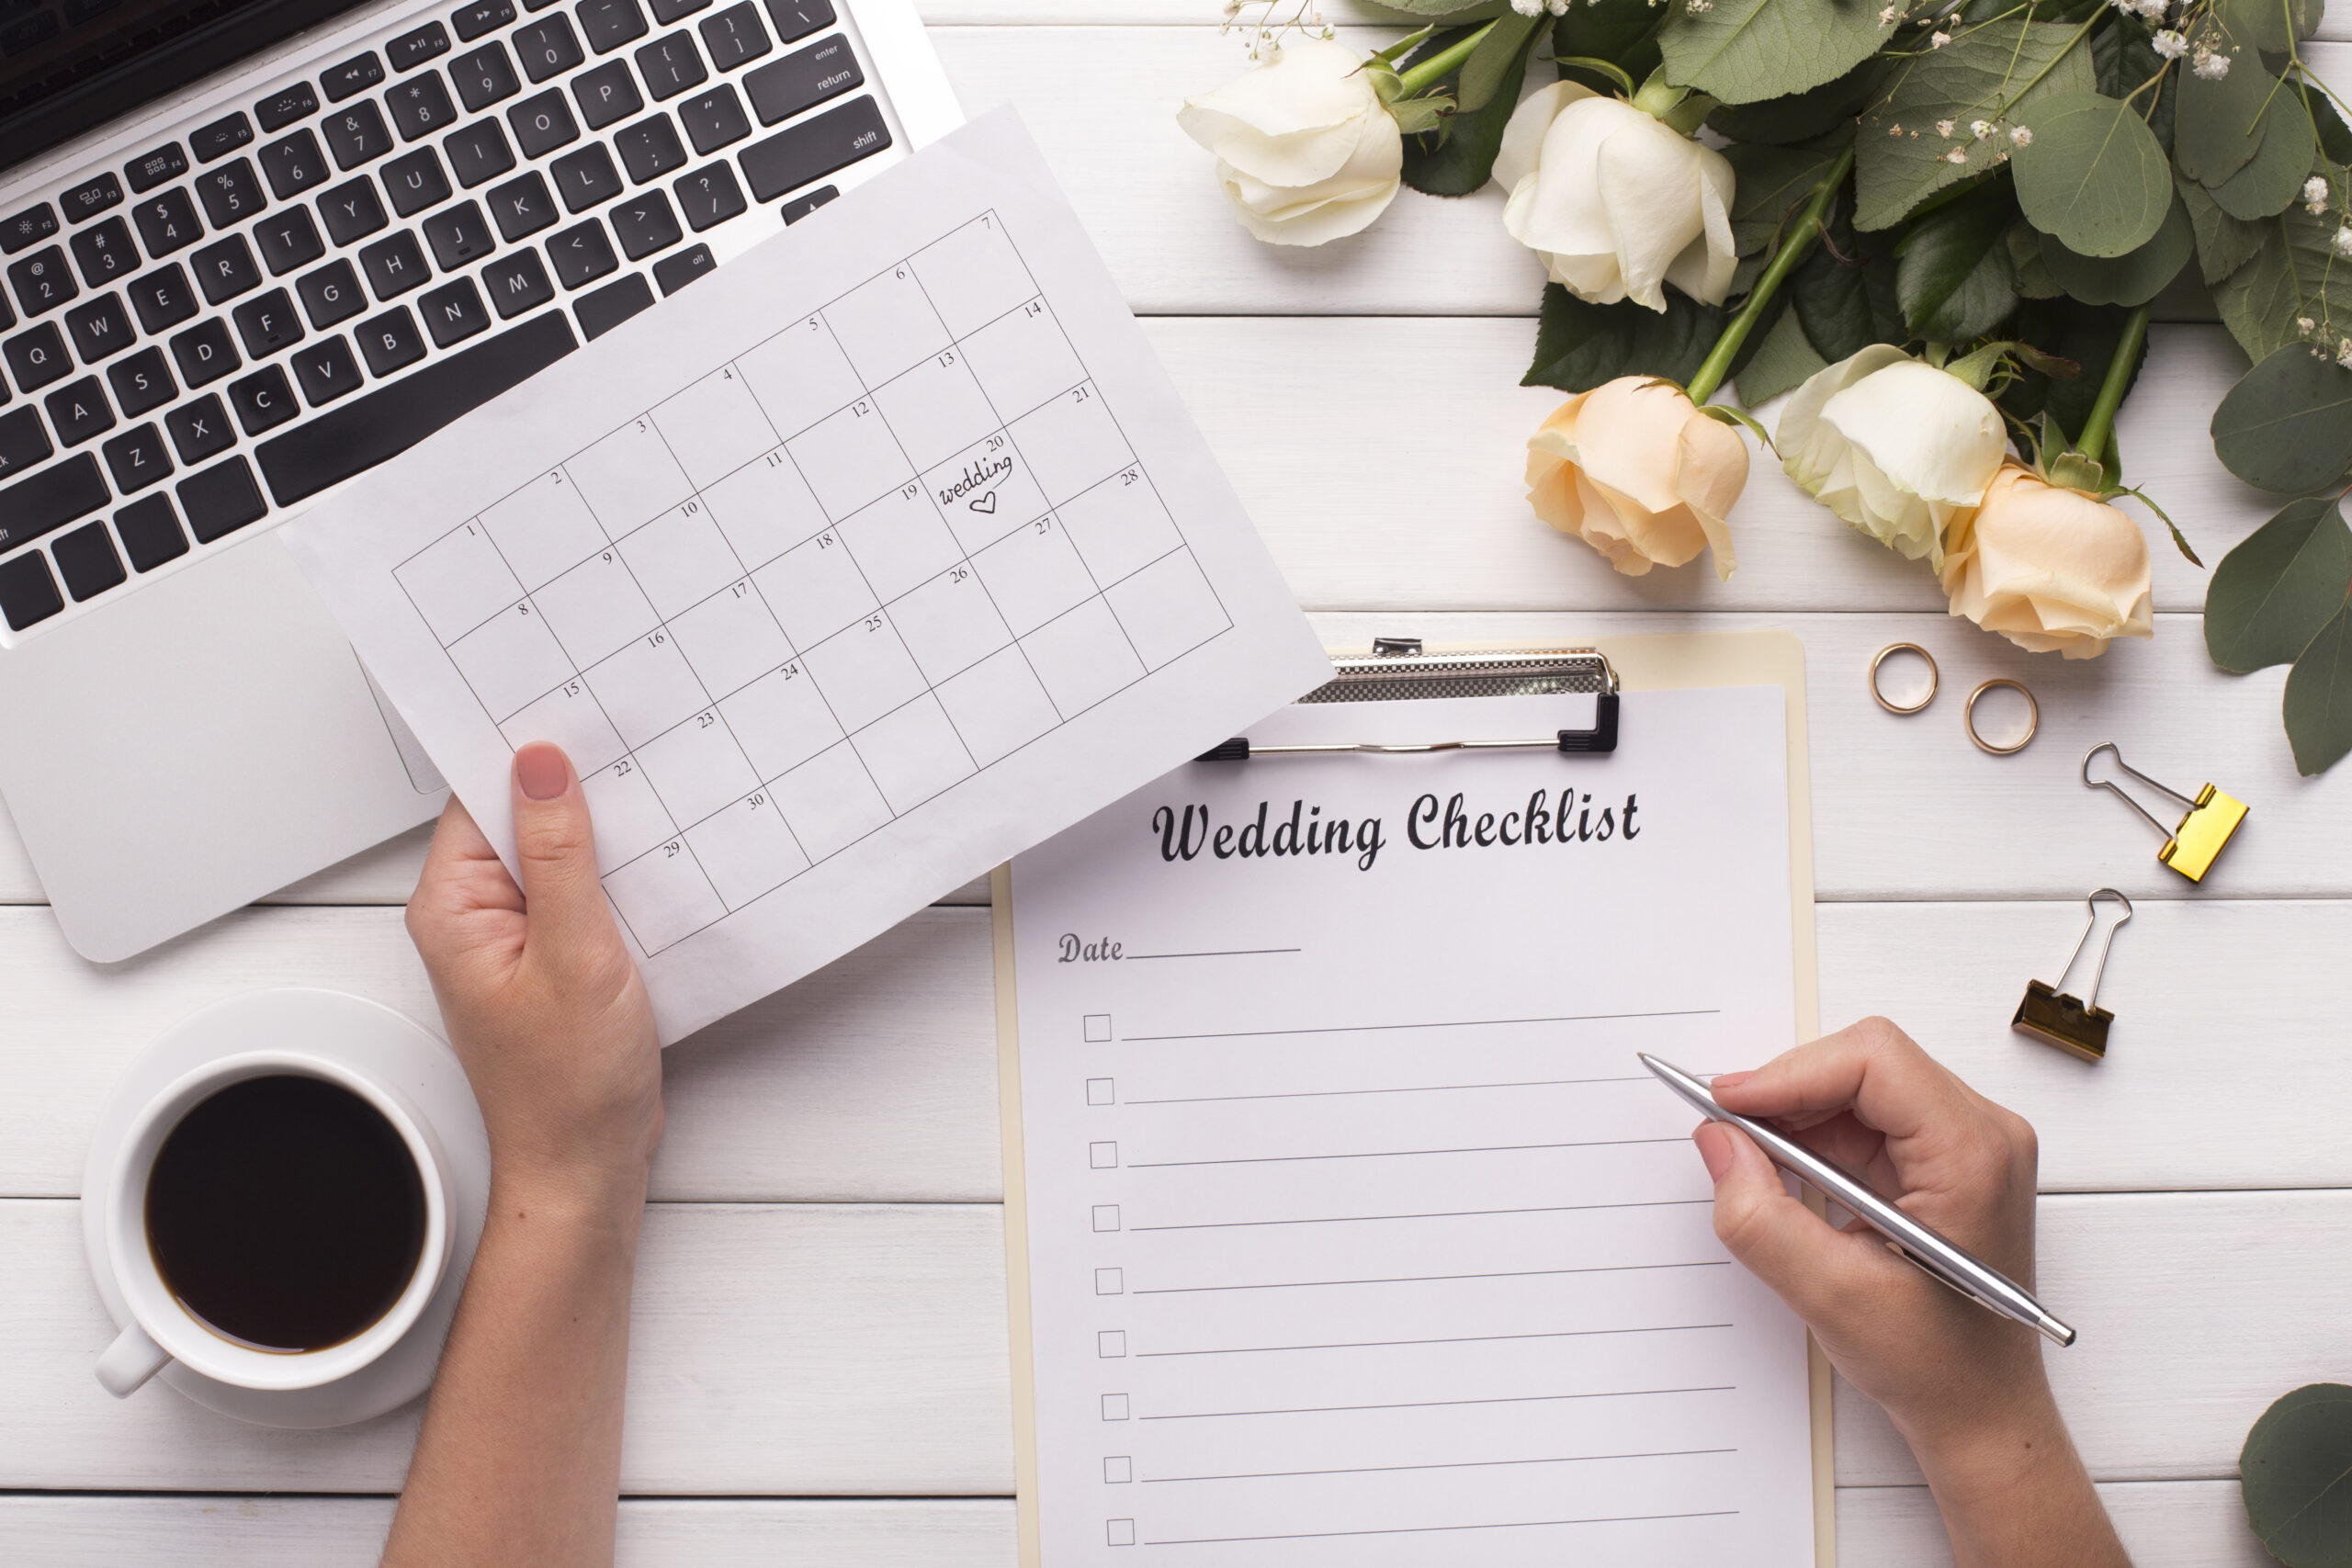 Building a wedding planning checklist for your Smoky Mountain wedding.